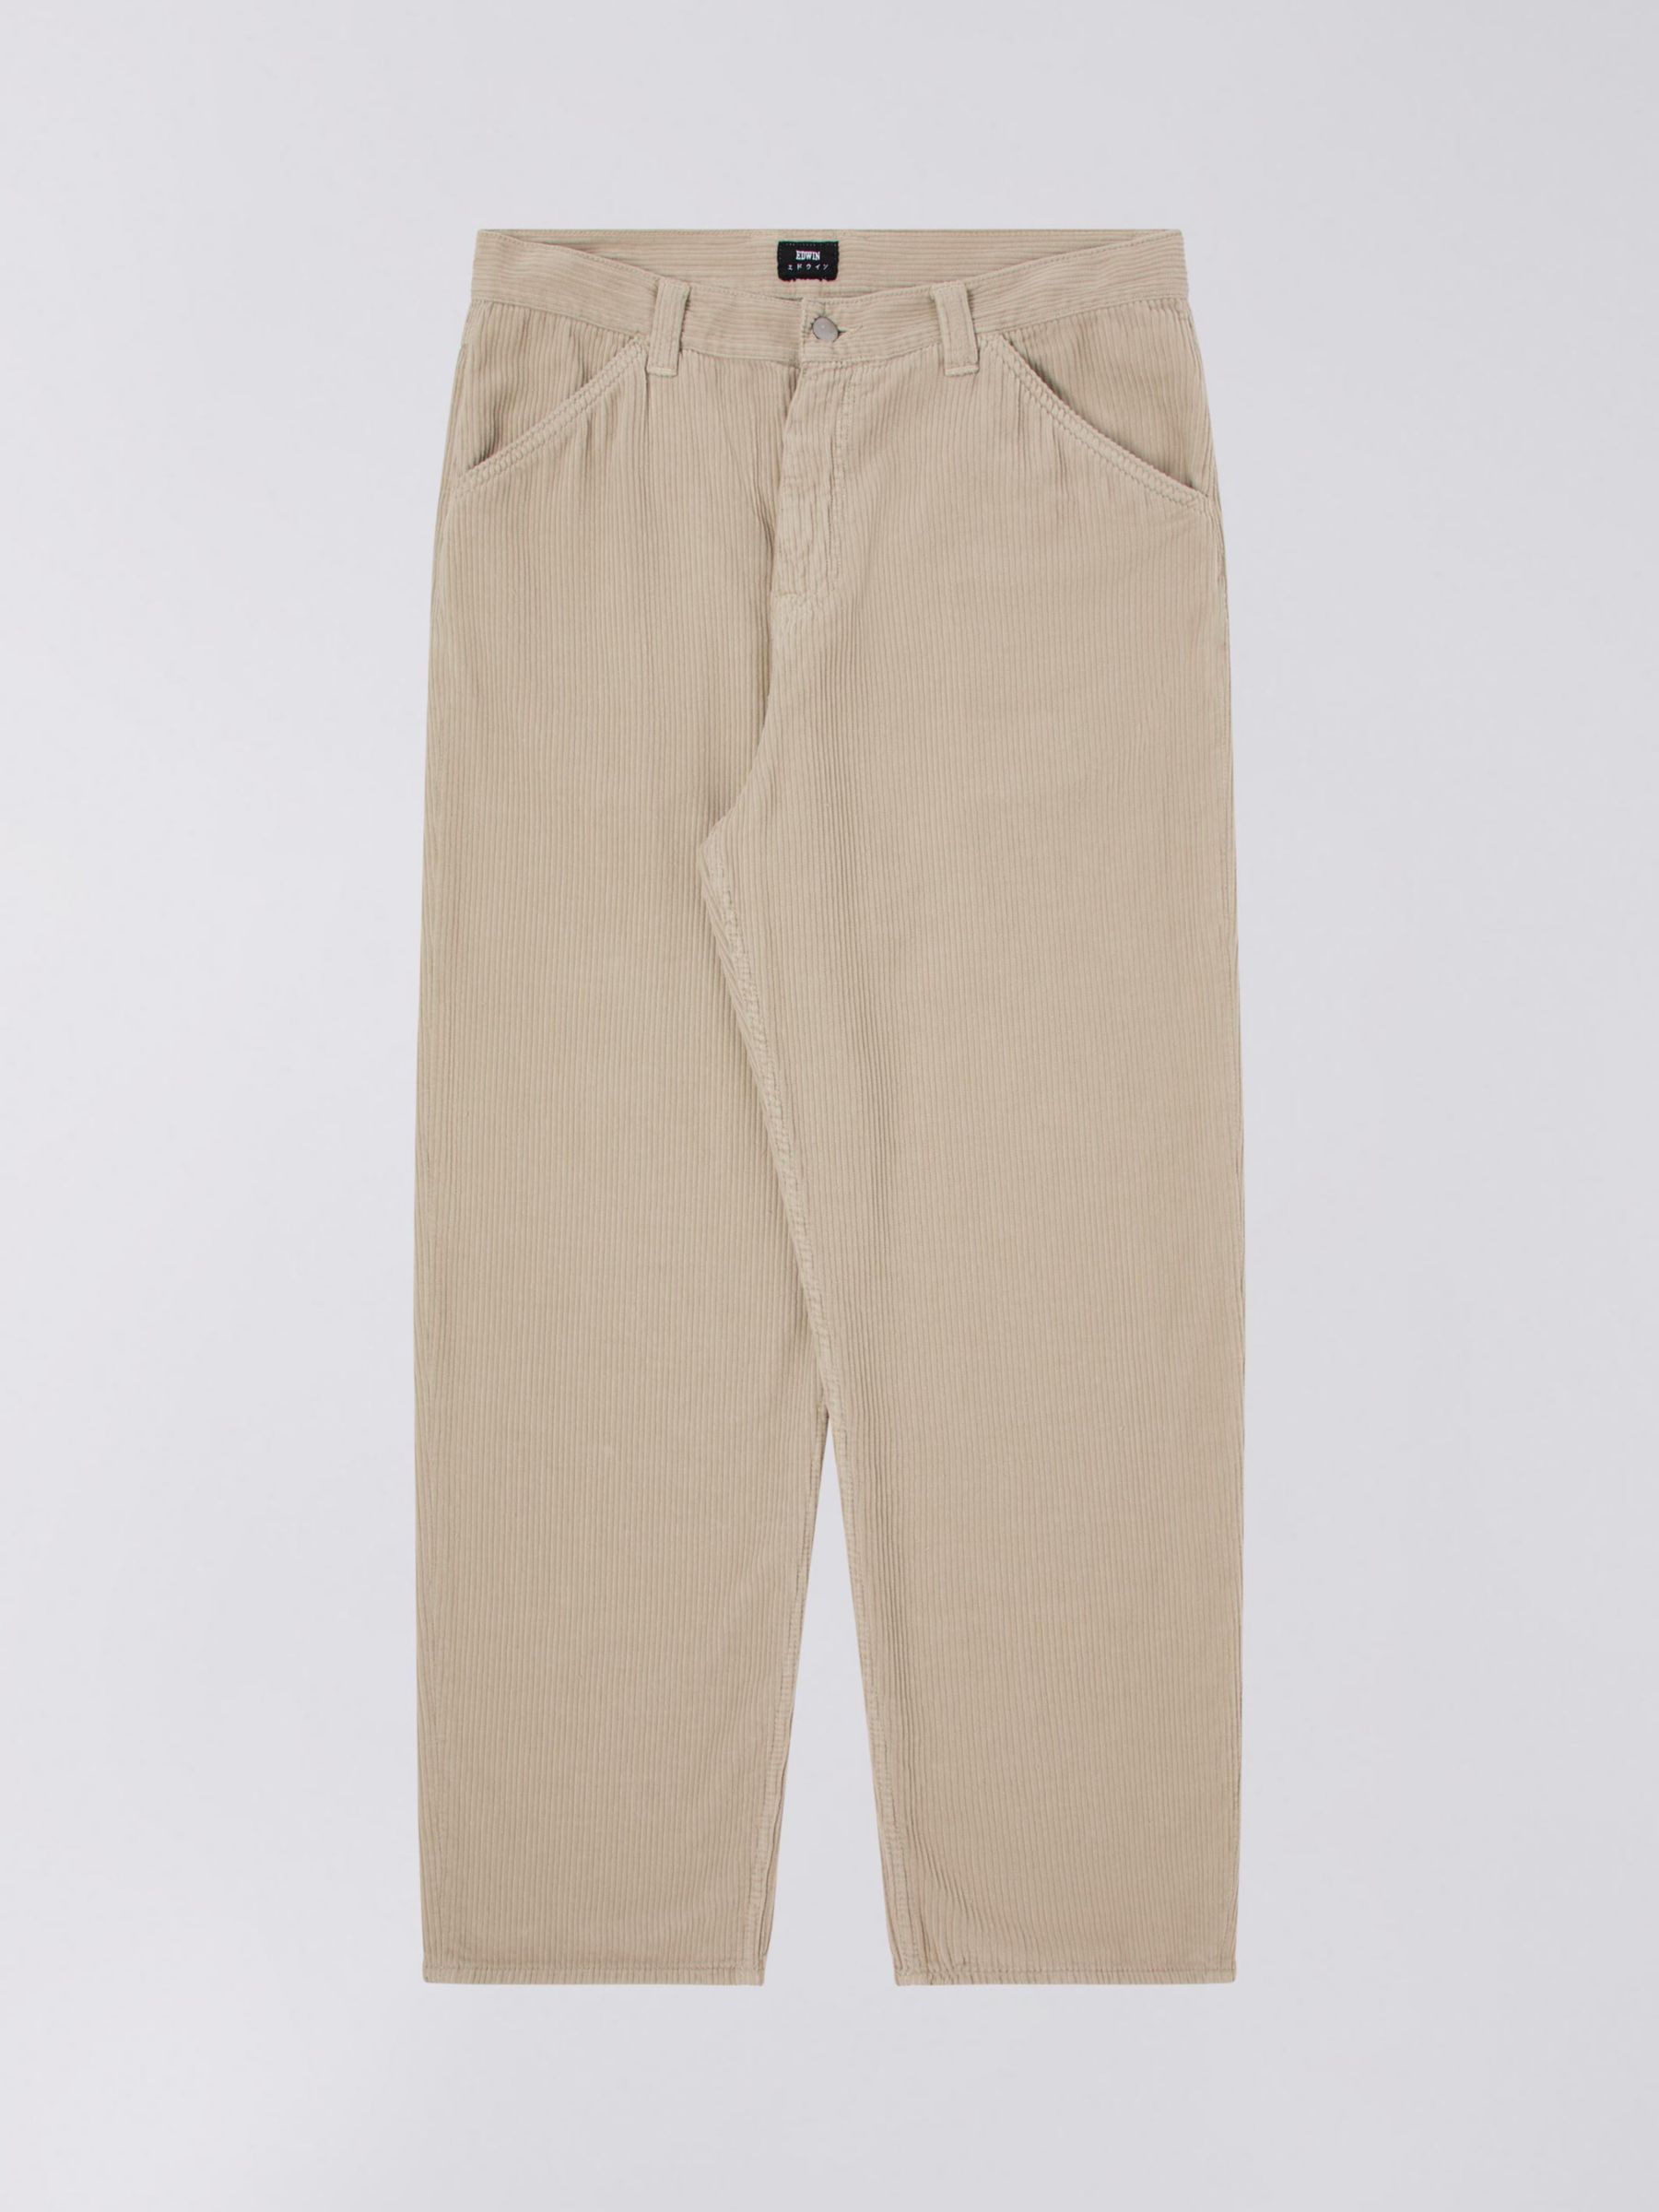 Edwin Sly Relaxed Fit Corduroy Trousers, Peyote, 36R